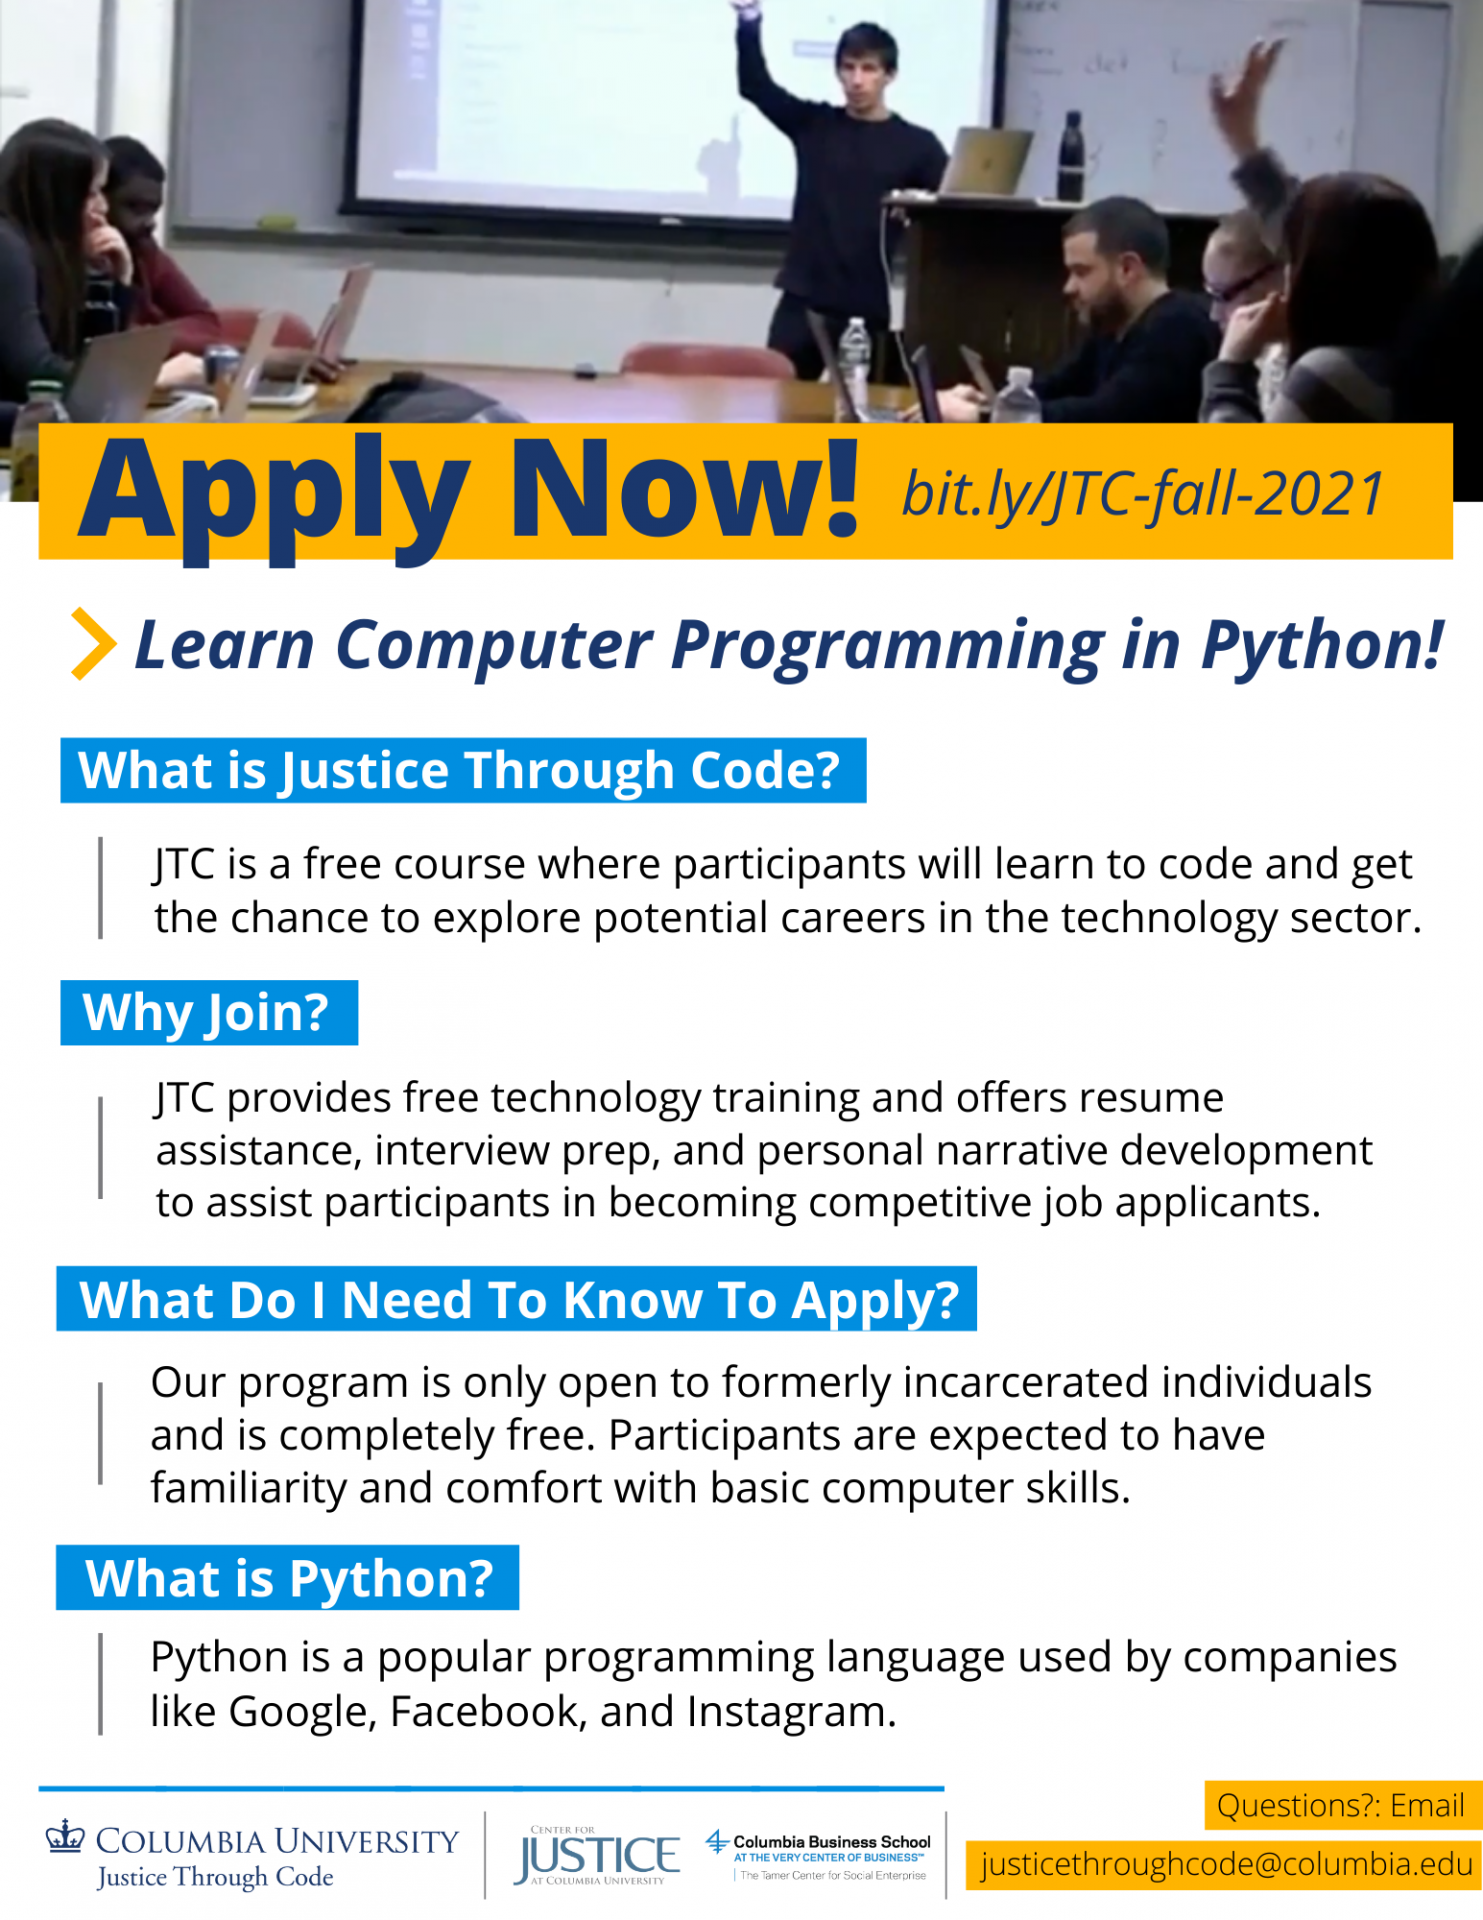 Apply Now! Learn Computer Programming With Python